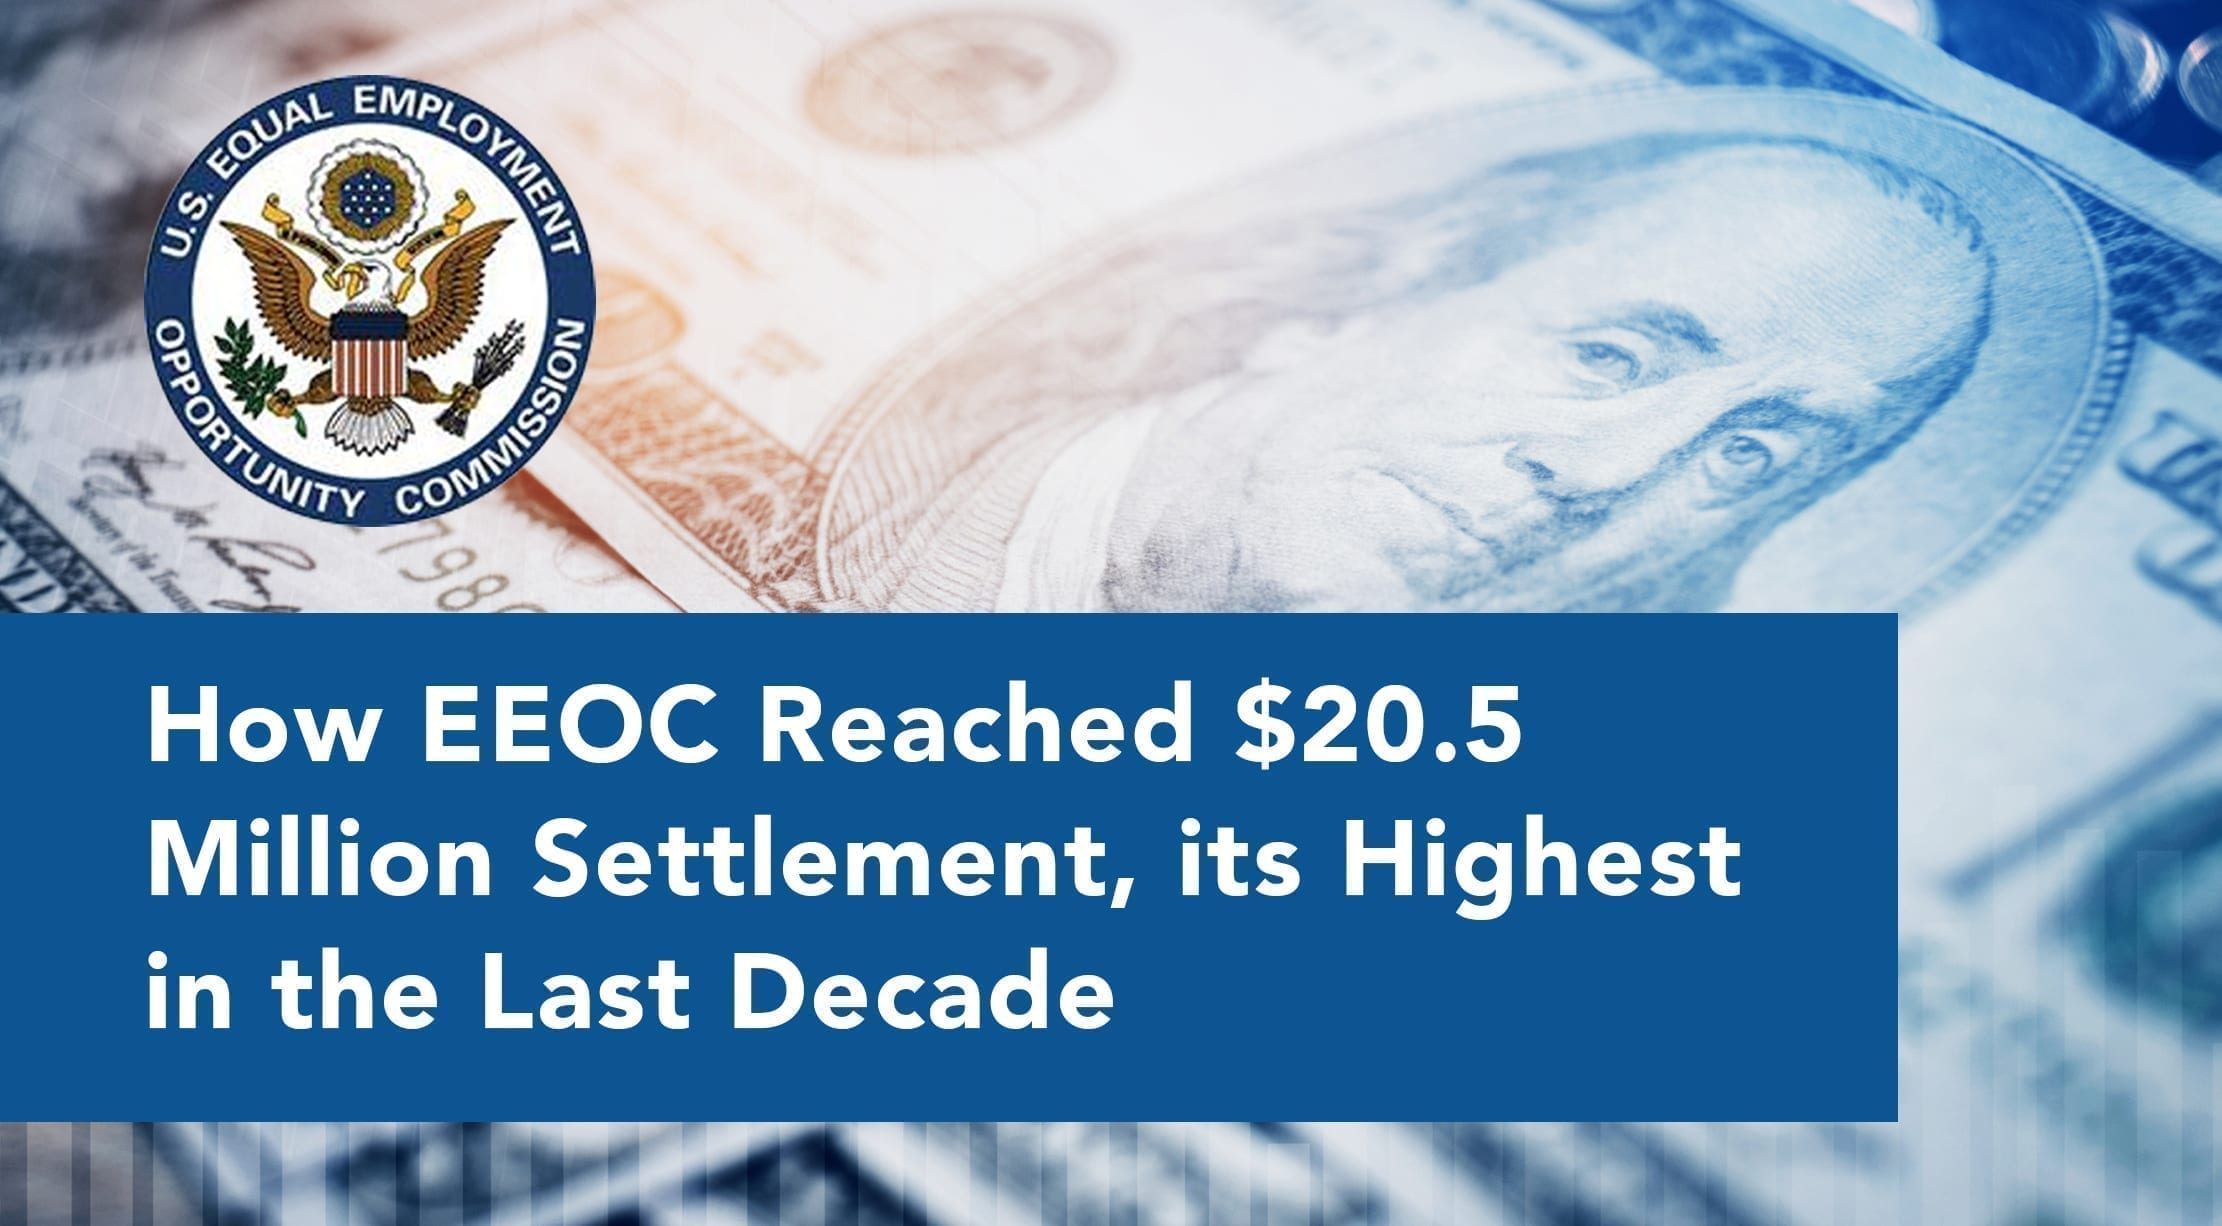 How EEOC Reached .21 Million Settlement, its Highest in the Last